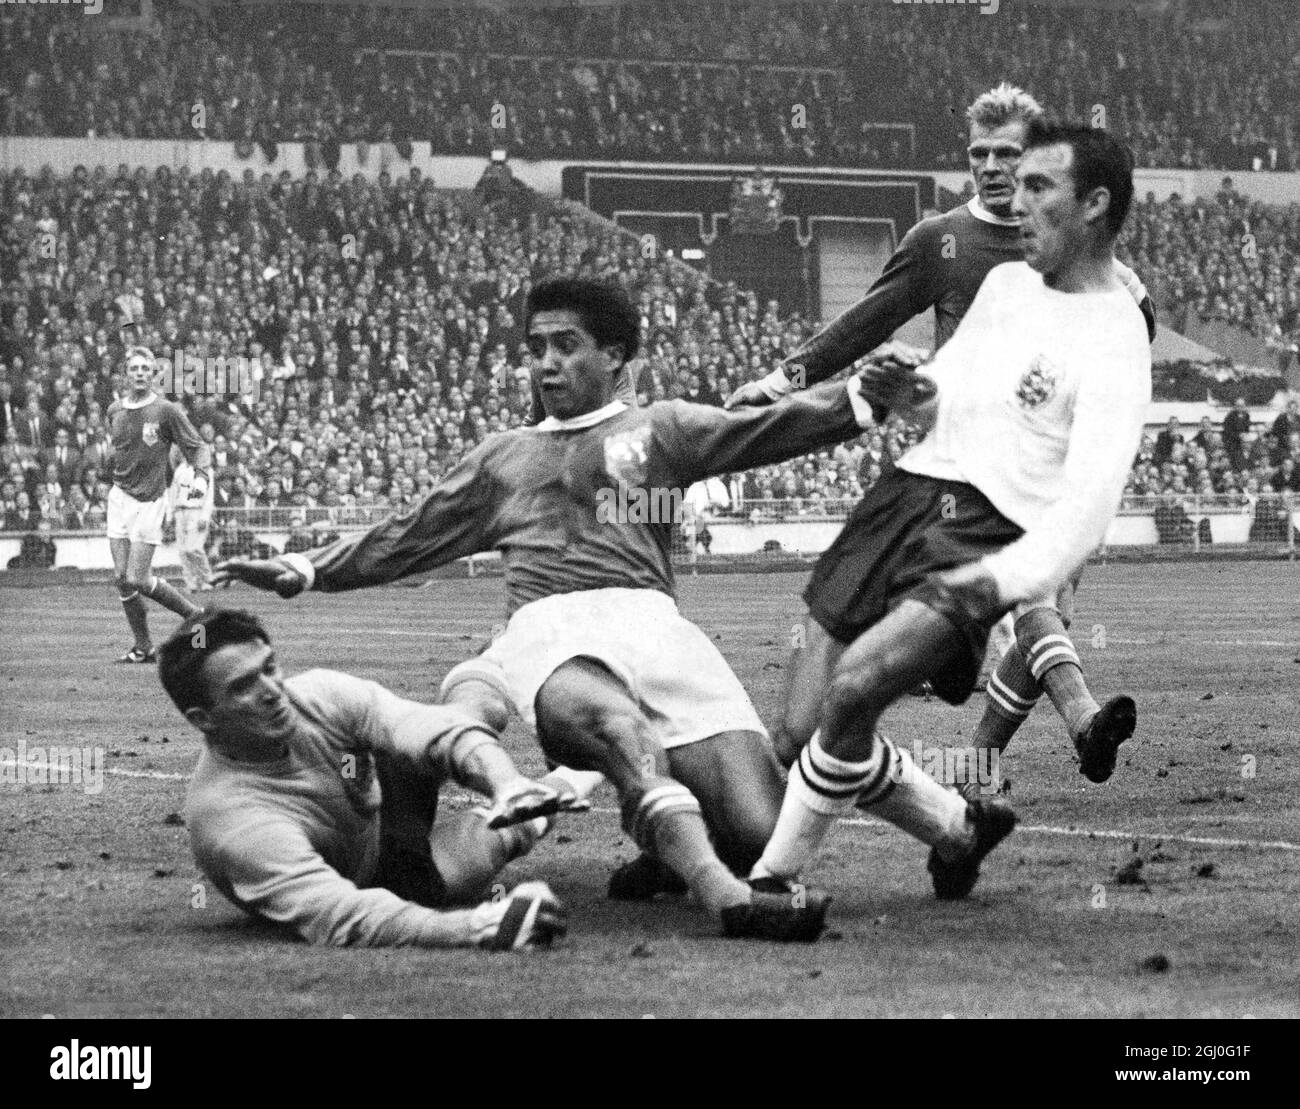 England v The Rest of the World Jimmy Greaves, the Spurs and England forward, scores the winning goal in the 86th minute to give England a well-deserved win over The Rest of the World team at Wembley. 23rd October 1963 Stock Photo